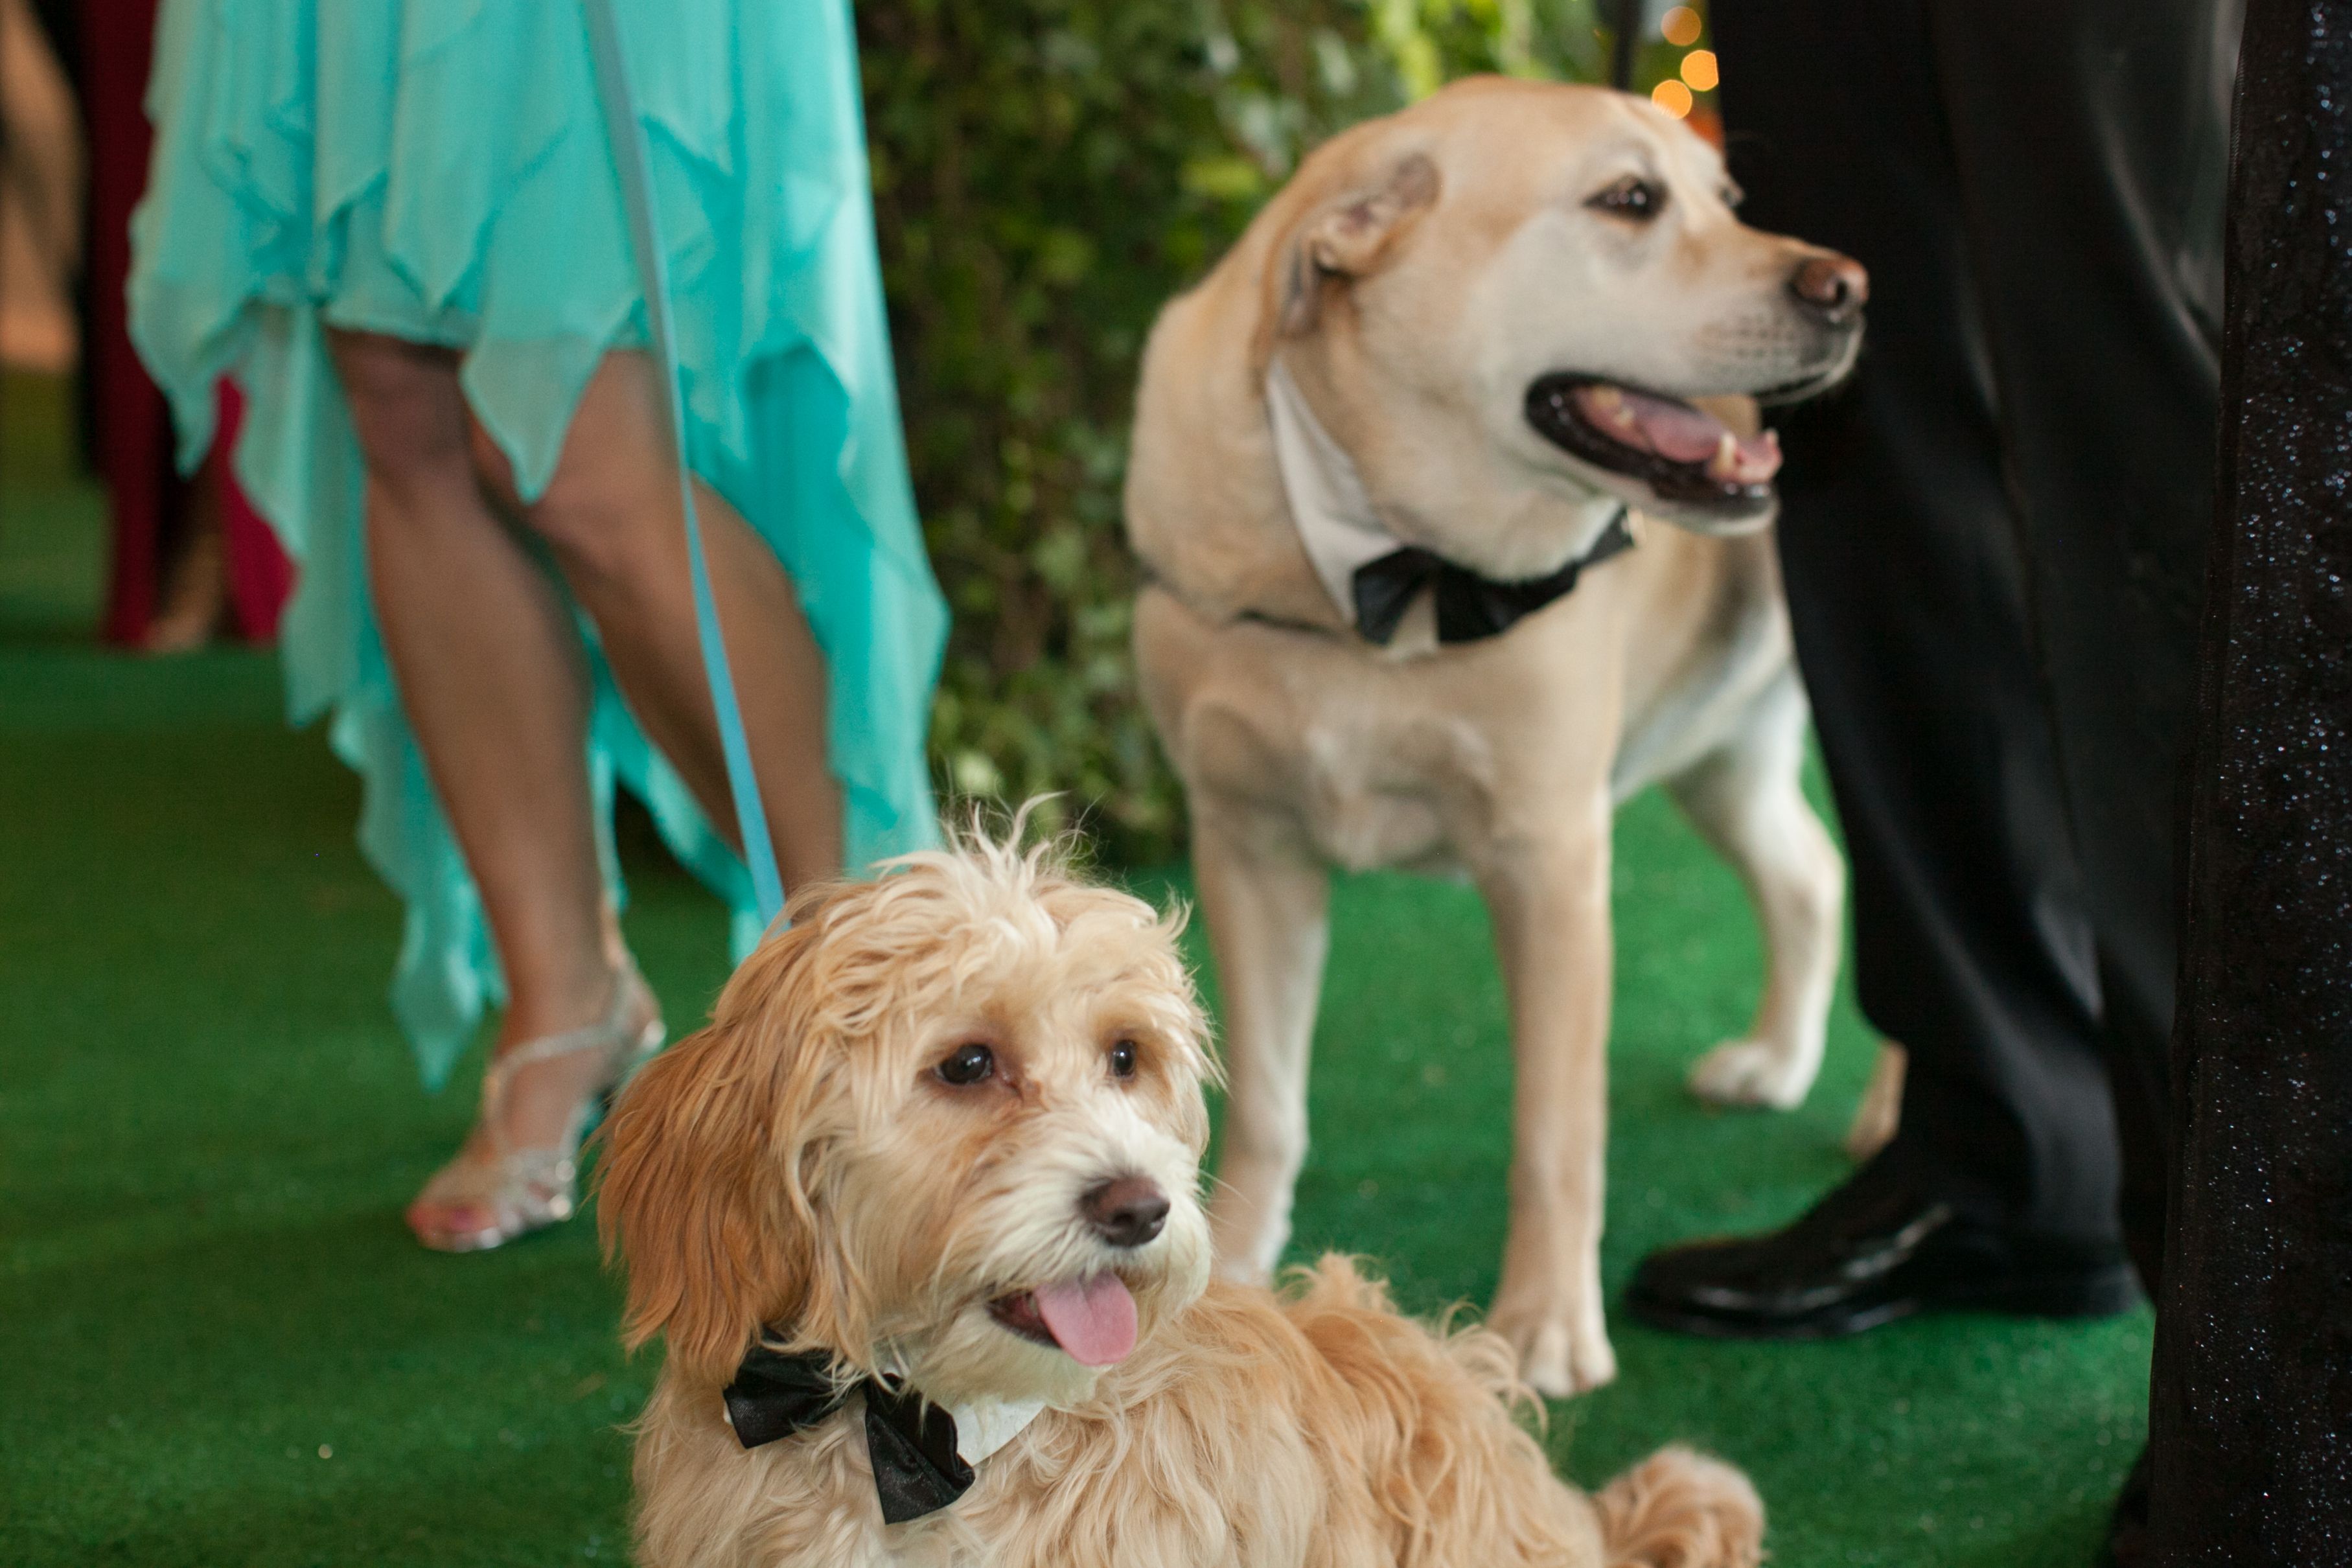 BlogPaws’ Daily News Bite: “The Fur Ball,” Raises Record-Breaking Funds